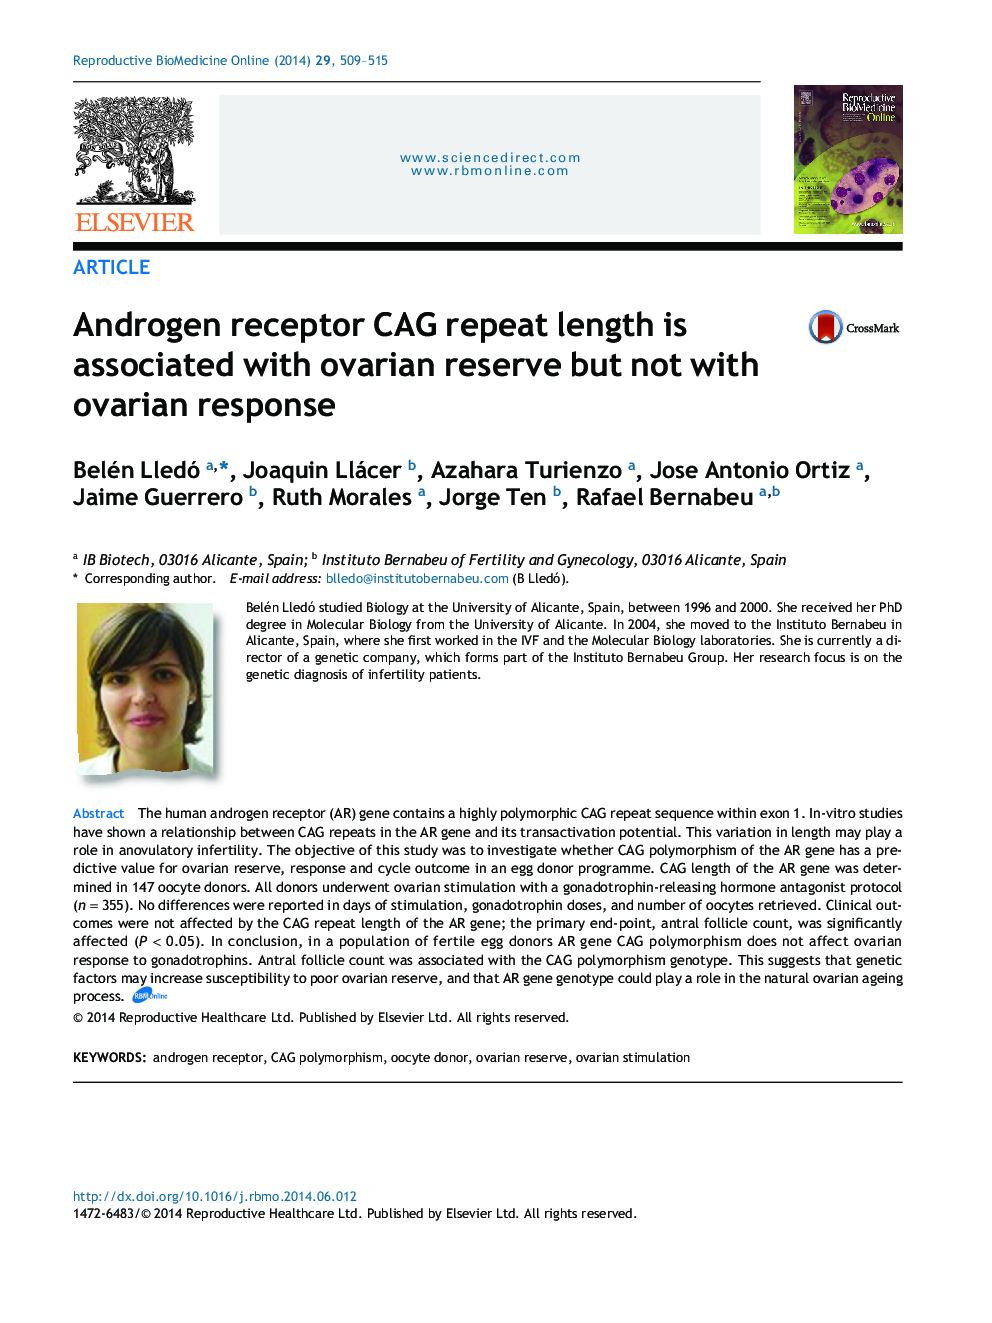 Androgen receptor CAG repeat length is associated with ovarian reserve but not with ovarian response